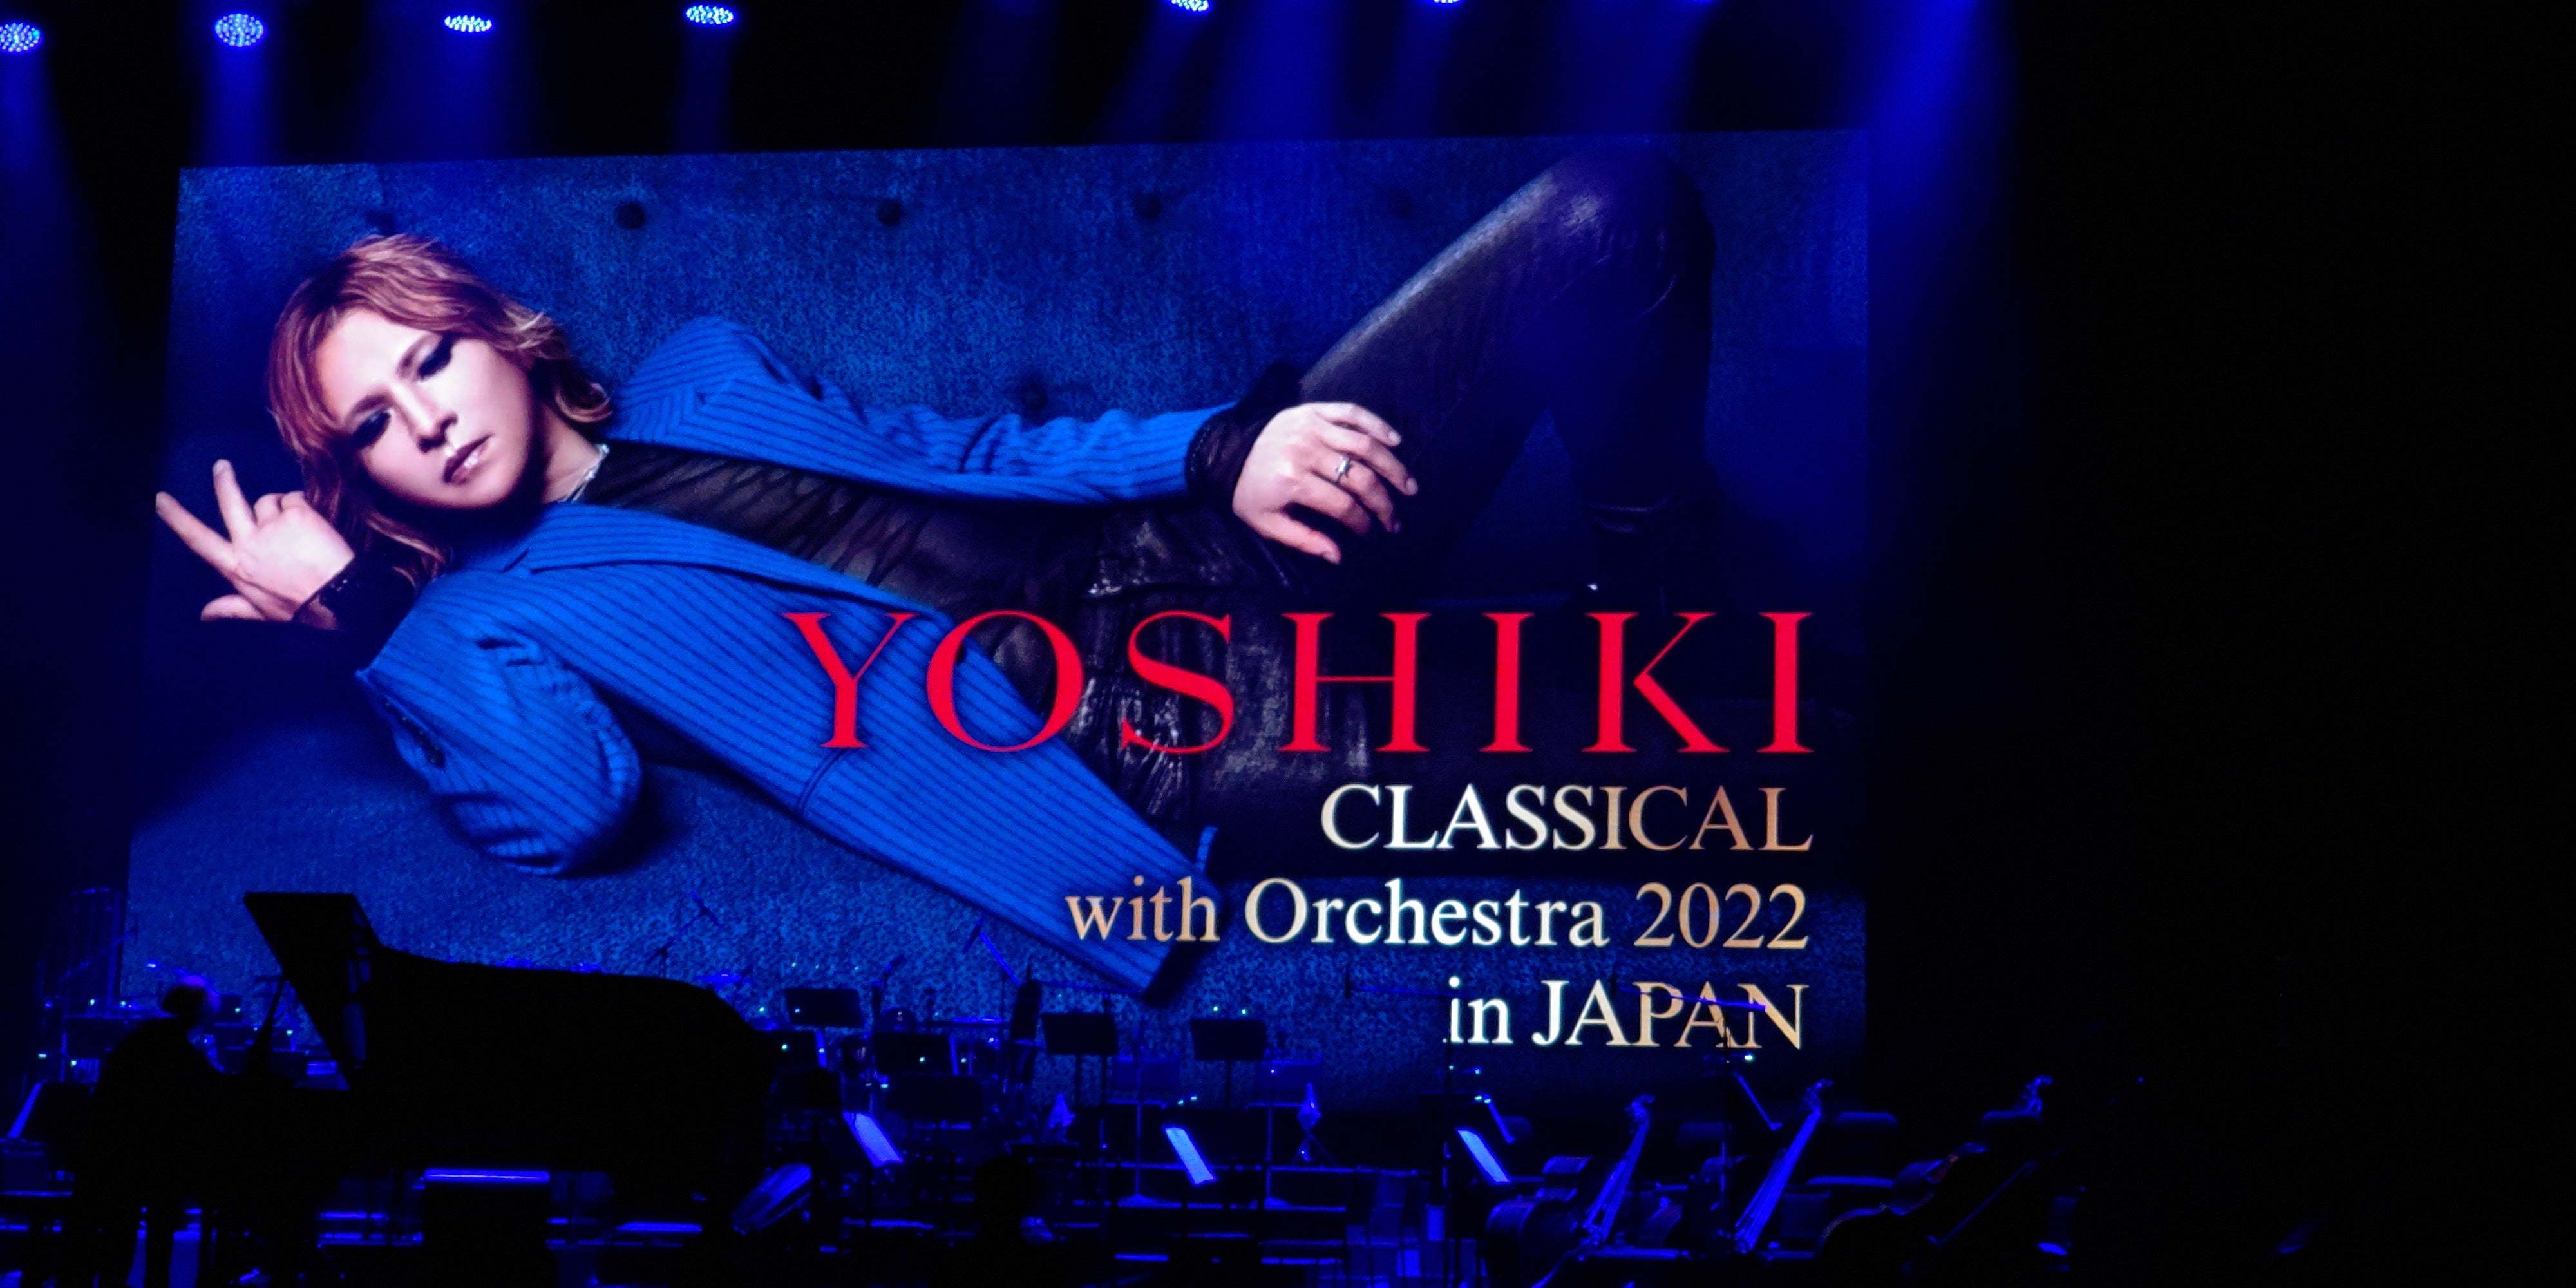 YOSHIKI CLASSICAL with Orchestra2022 in JAPAN | はあれいのブログ